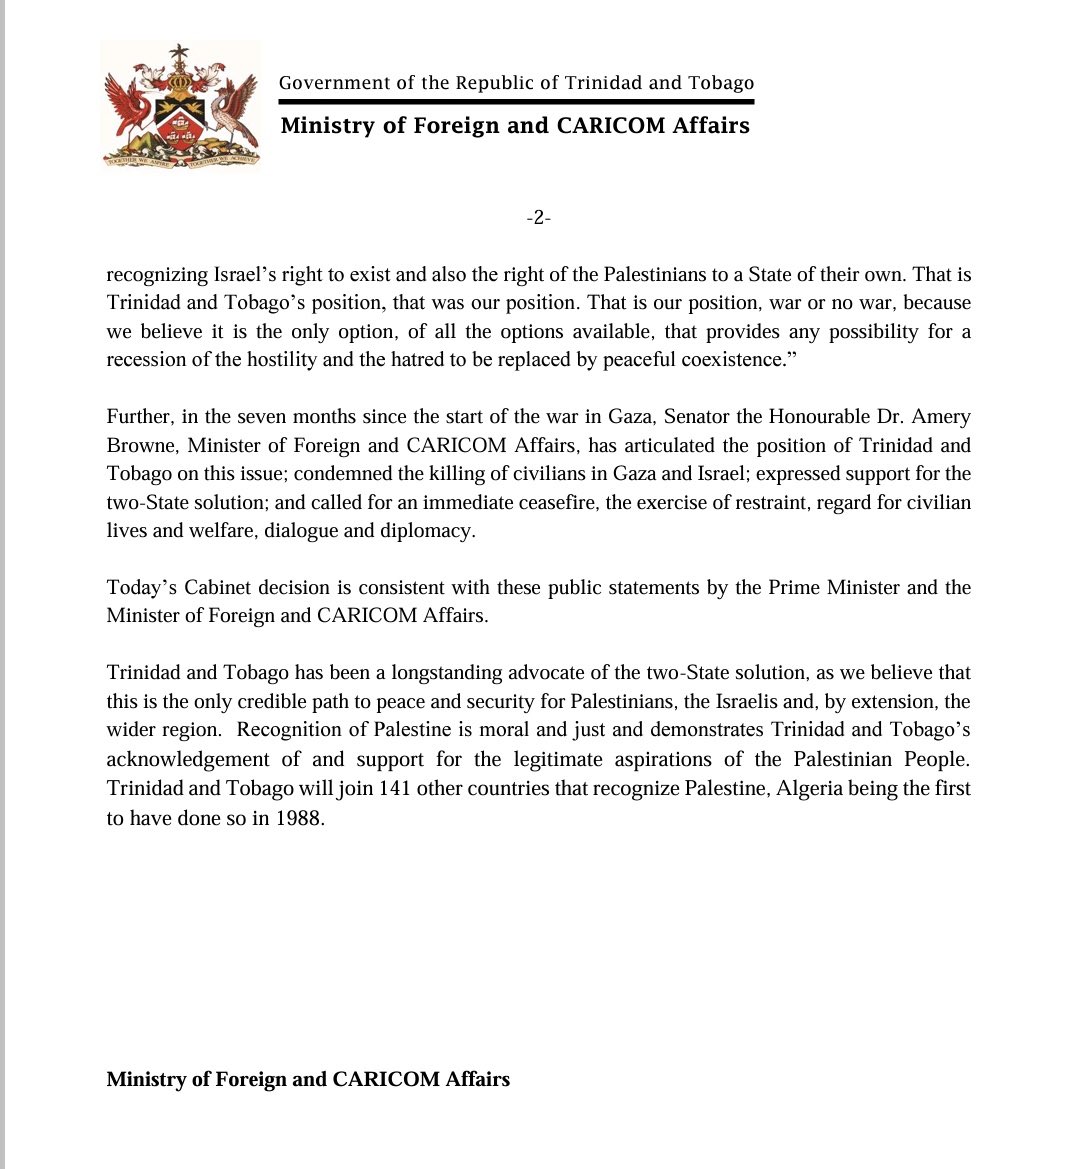 Trinidad and Tobago now formally recognizes the State of Palestine. The Government of the Republic of Trinidad and Tobago has taken the decision, at its meeting of Cabinet today, to formally recognise the State of Palestine.